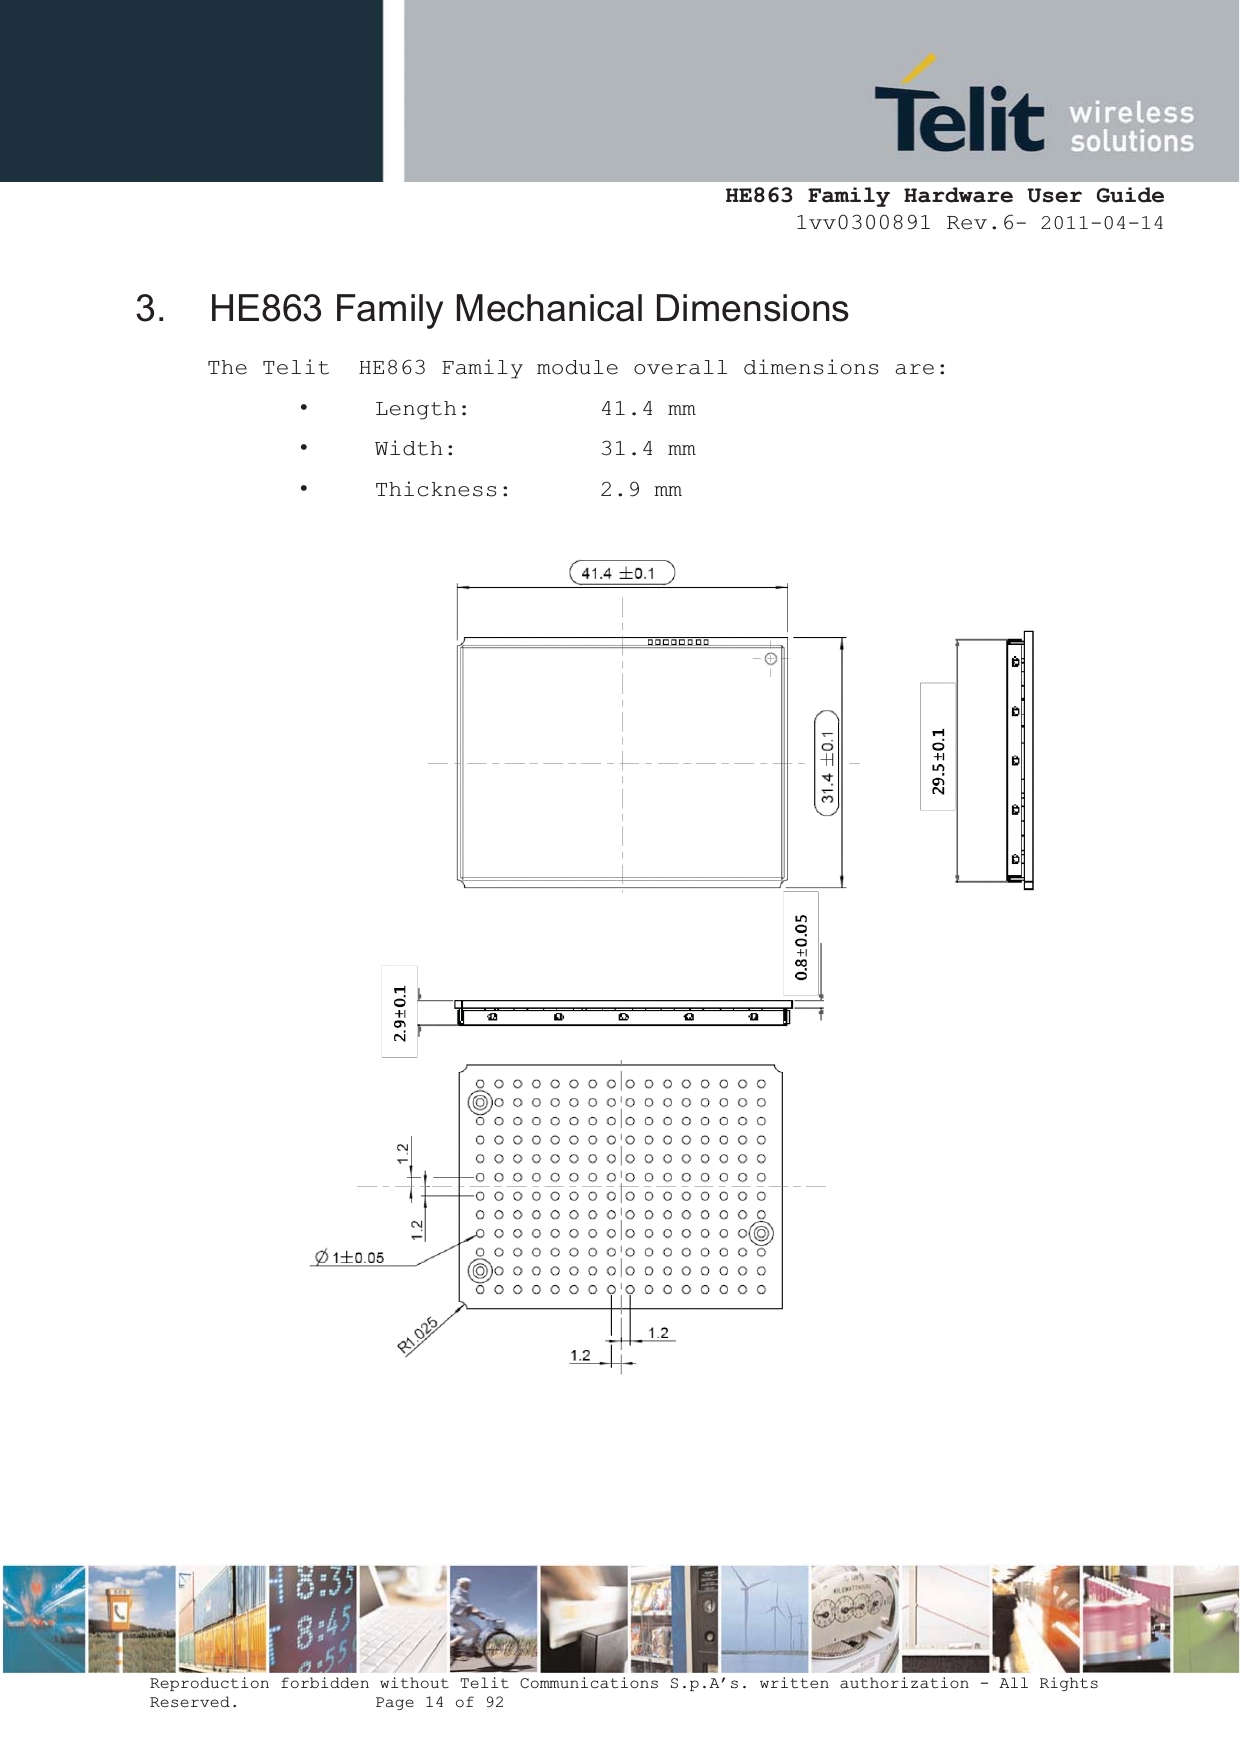  HE863 Family Hardware User Guide 1vv0300891 Rev.6- 2011-04-14    Reproduction forbidden without Telit Communications S.p.A’s. written authorization - All Rights Reserved.    Page 14 of 92  3.  HE863 Family Mechanical Dimensions The Telit  HE863 Family module overall dimensions are:  •  Length:     41.4 mm •  Width:     31.4 mm •  Thickness:   2.9 mm    